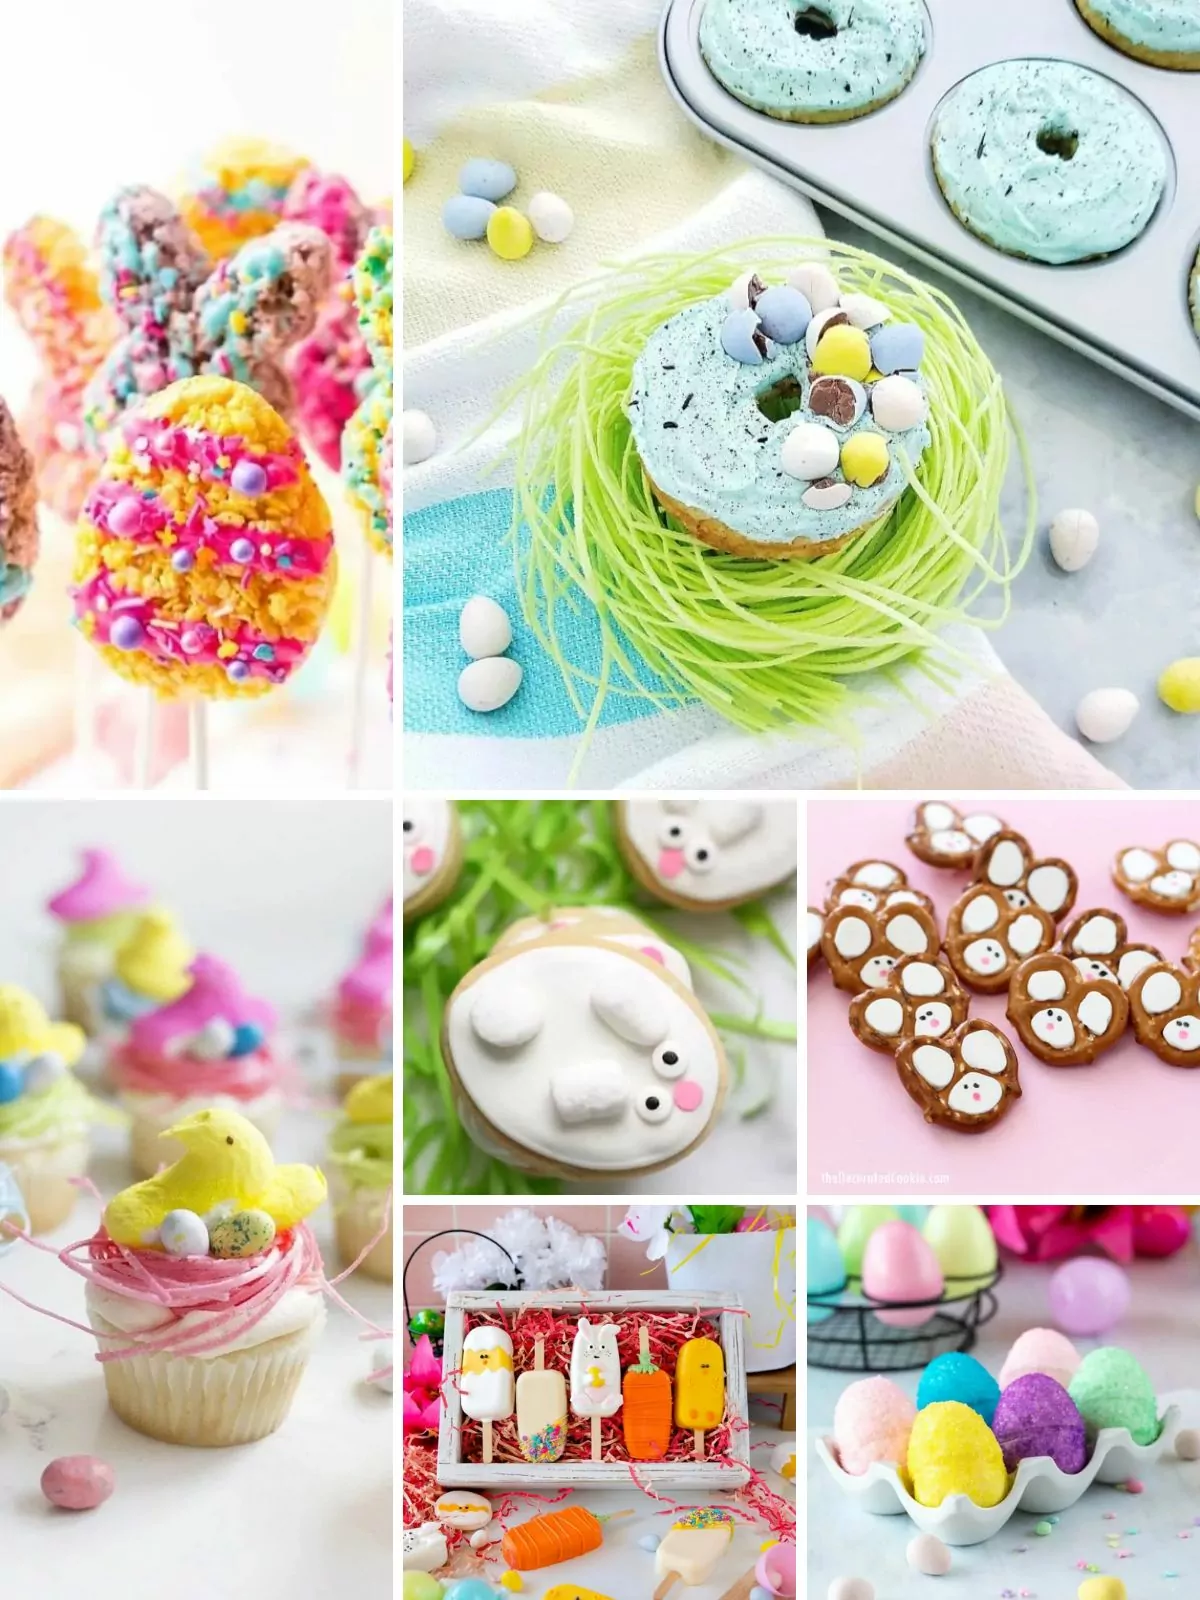 15 different treats to prepare for Easter.